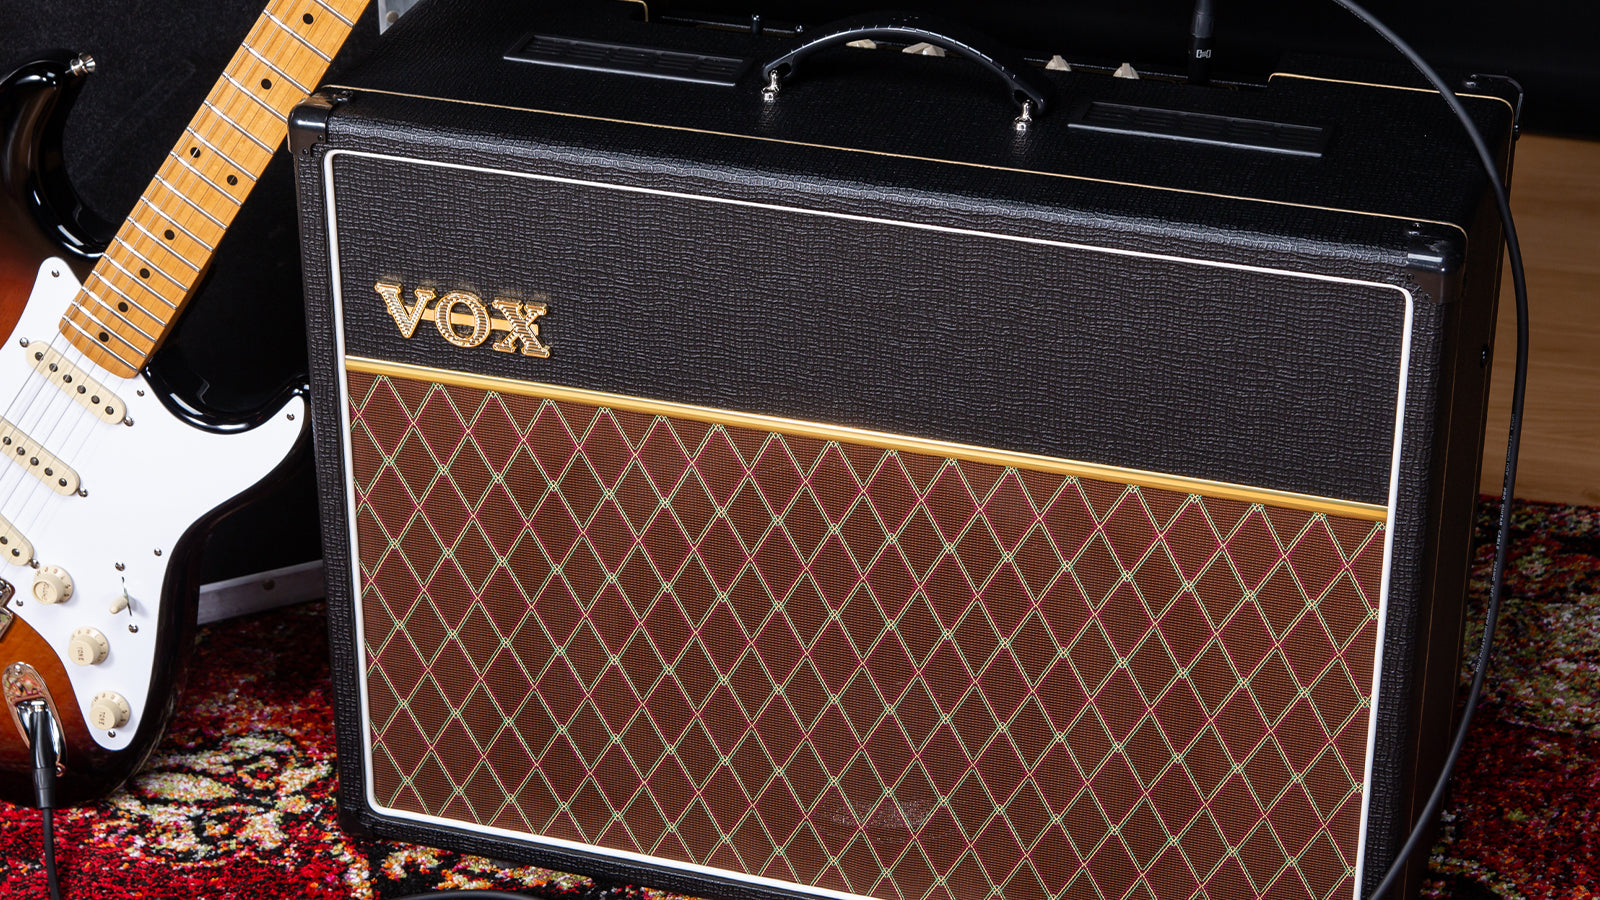 A guitar leaning against a VOX amplifier